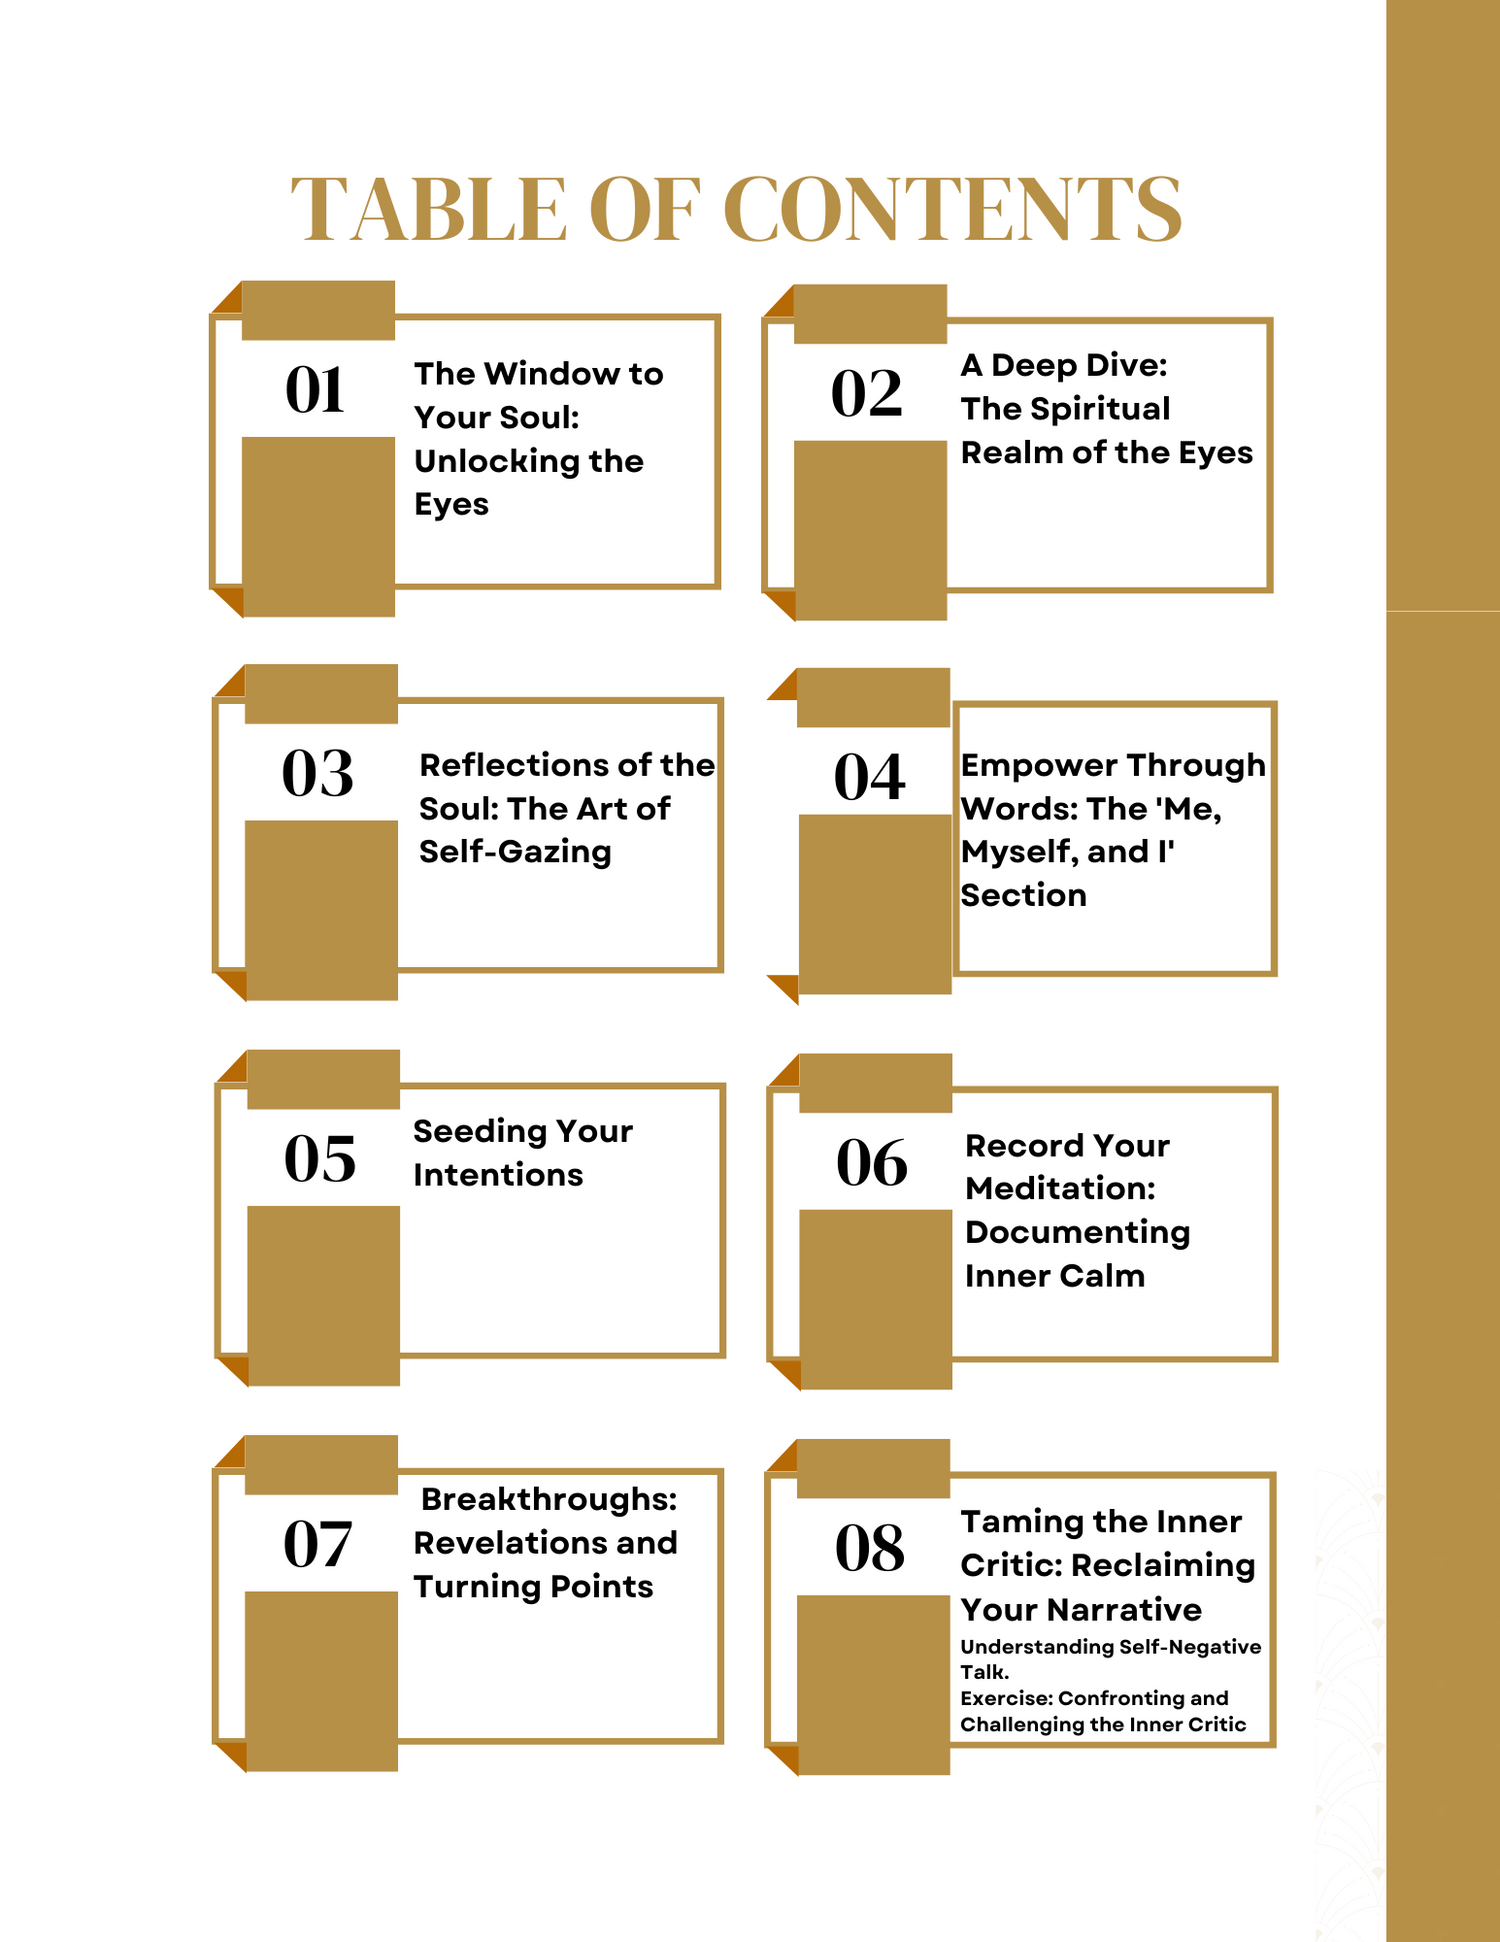 table of contents of Turn your vulnerabilities into empowerment through a powerful &amp; inspirational fillable PDF journal  by emmanuelle Blanc from Unleash your inner wealth